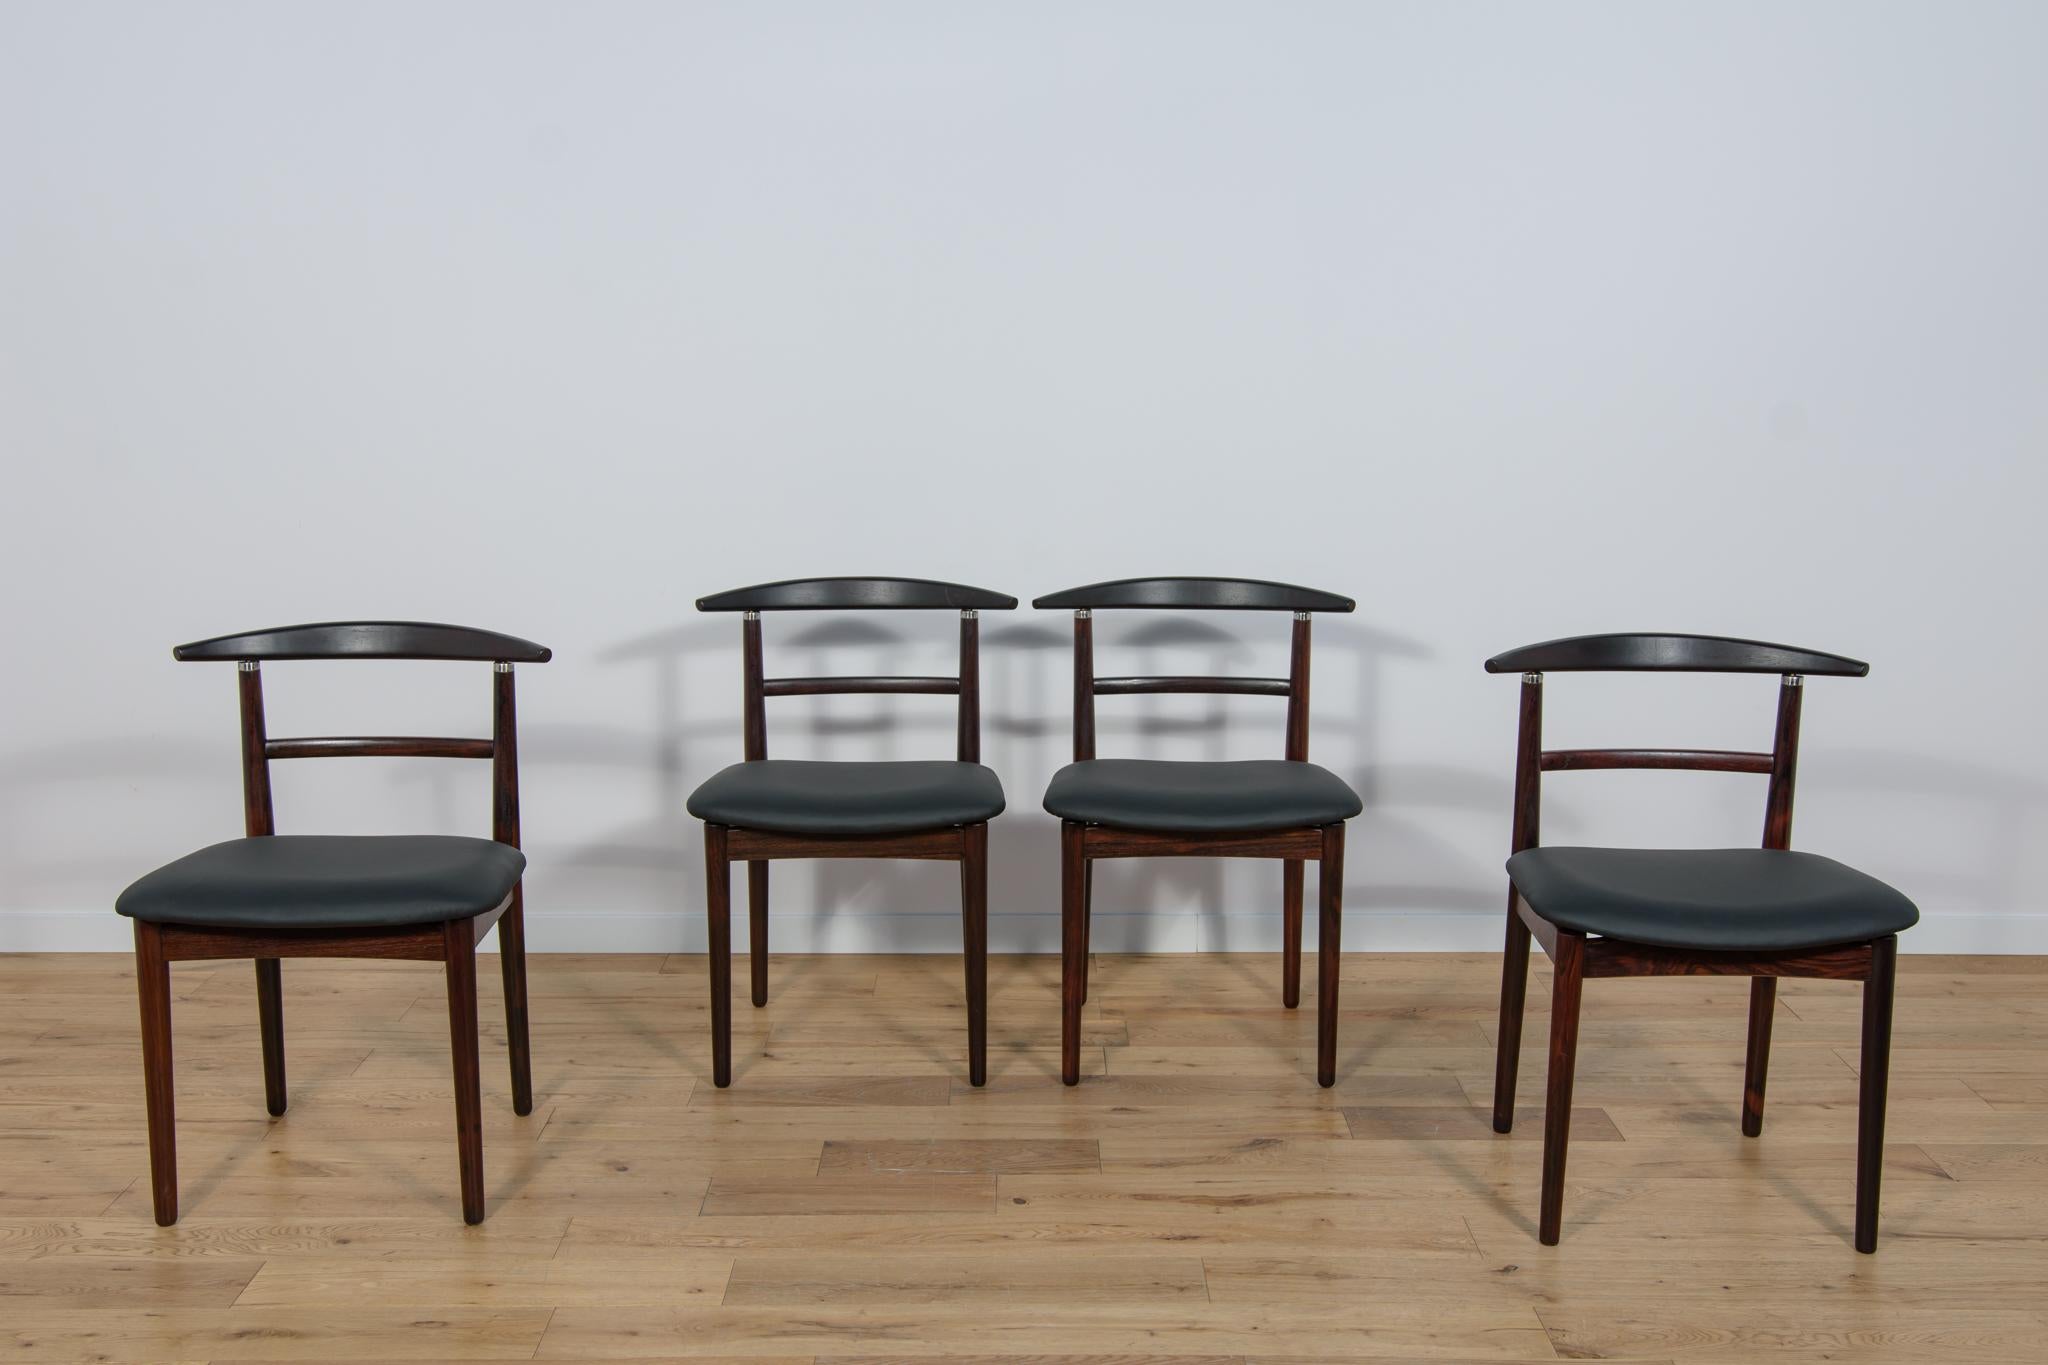 Danish Rosewood Dining Chairs by Helge Sibast & Børge Rammerskov, Denmark, 1960s. For Sale